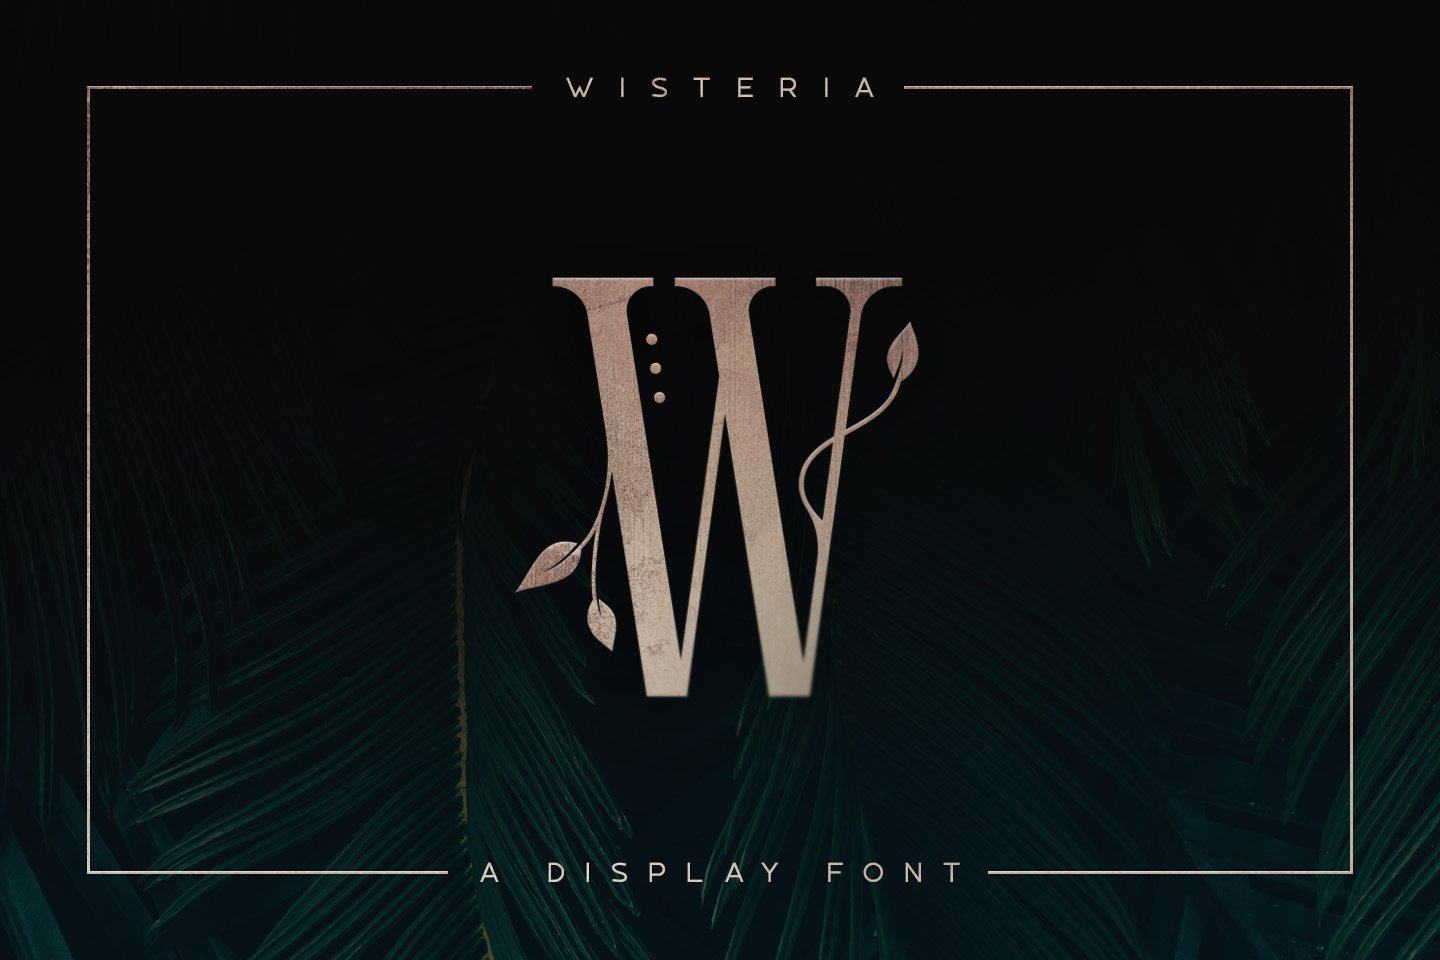 Wisteria • Display Font cover image.